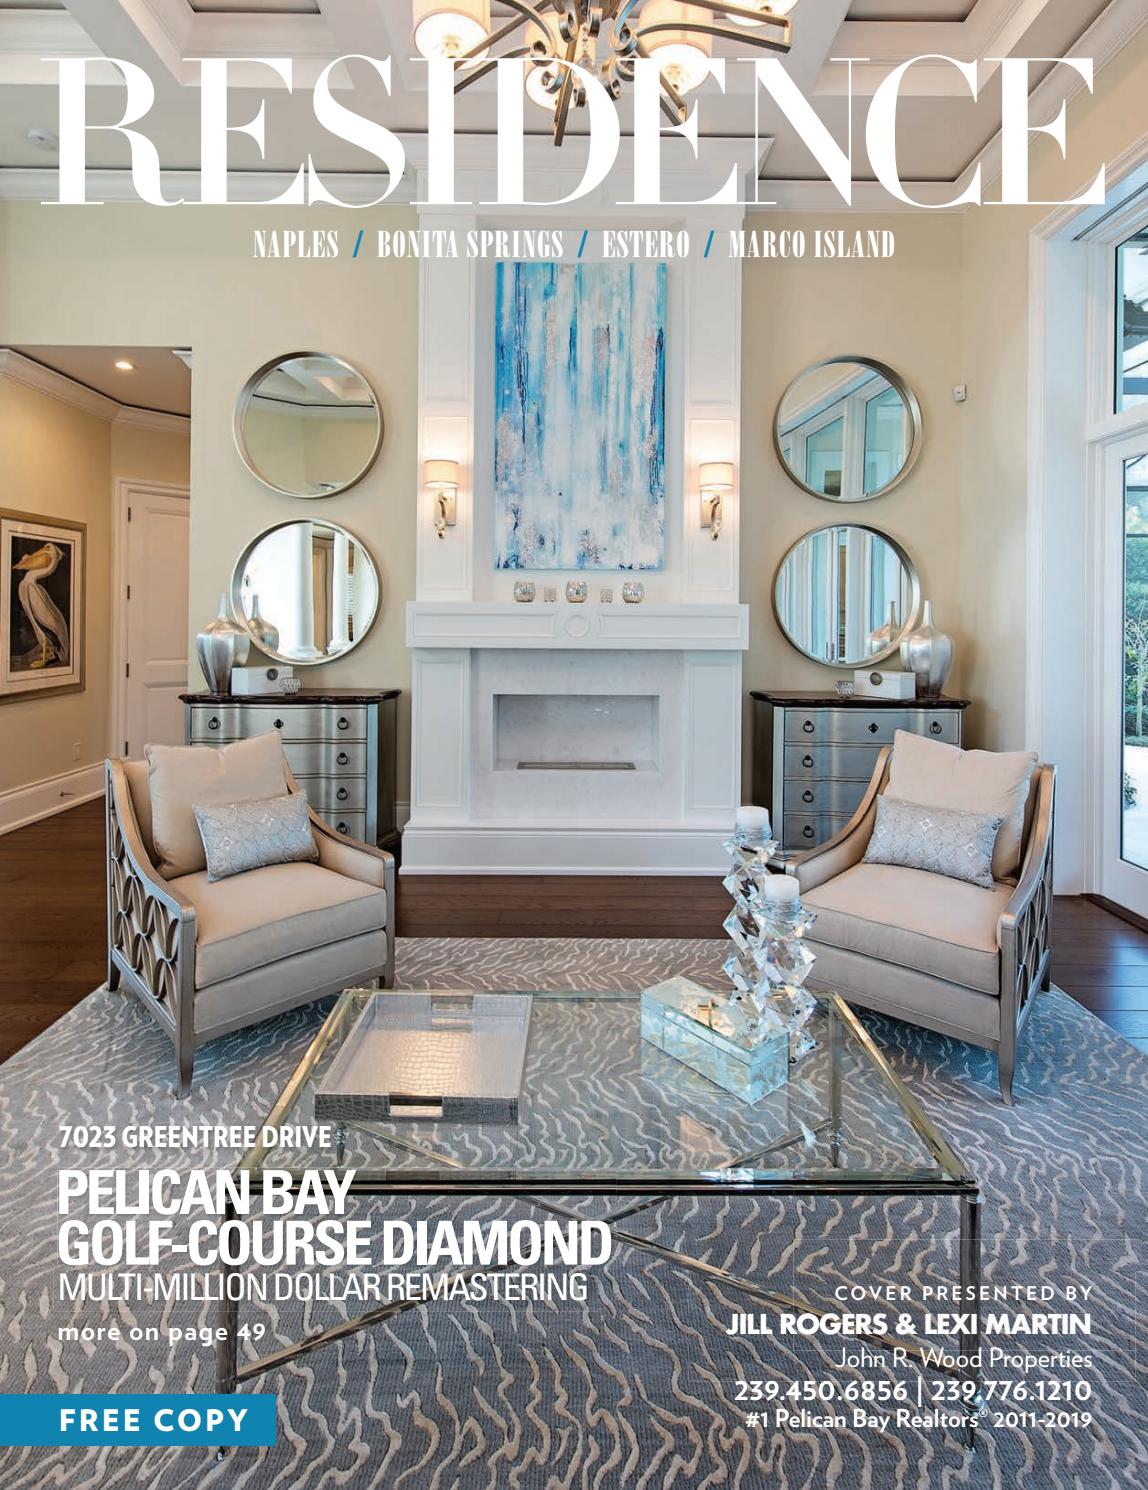 Wainscoting Fireplace Best Of Residence Magazine